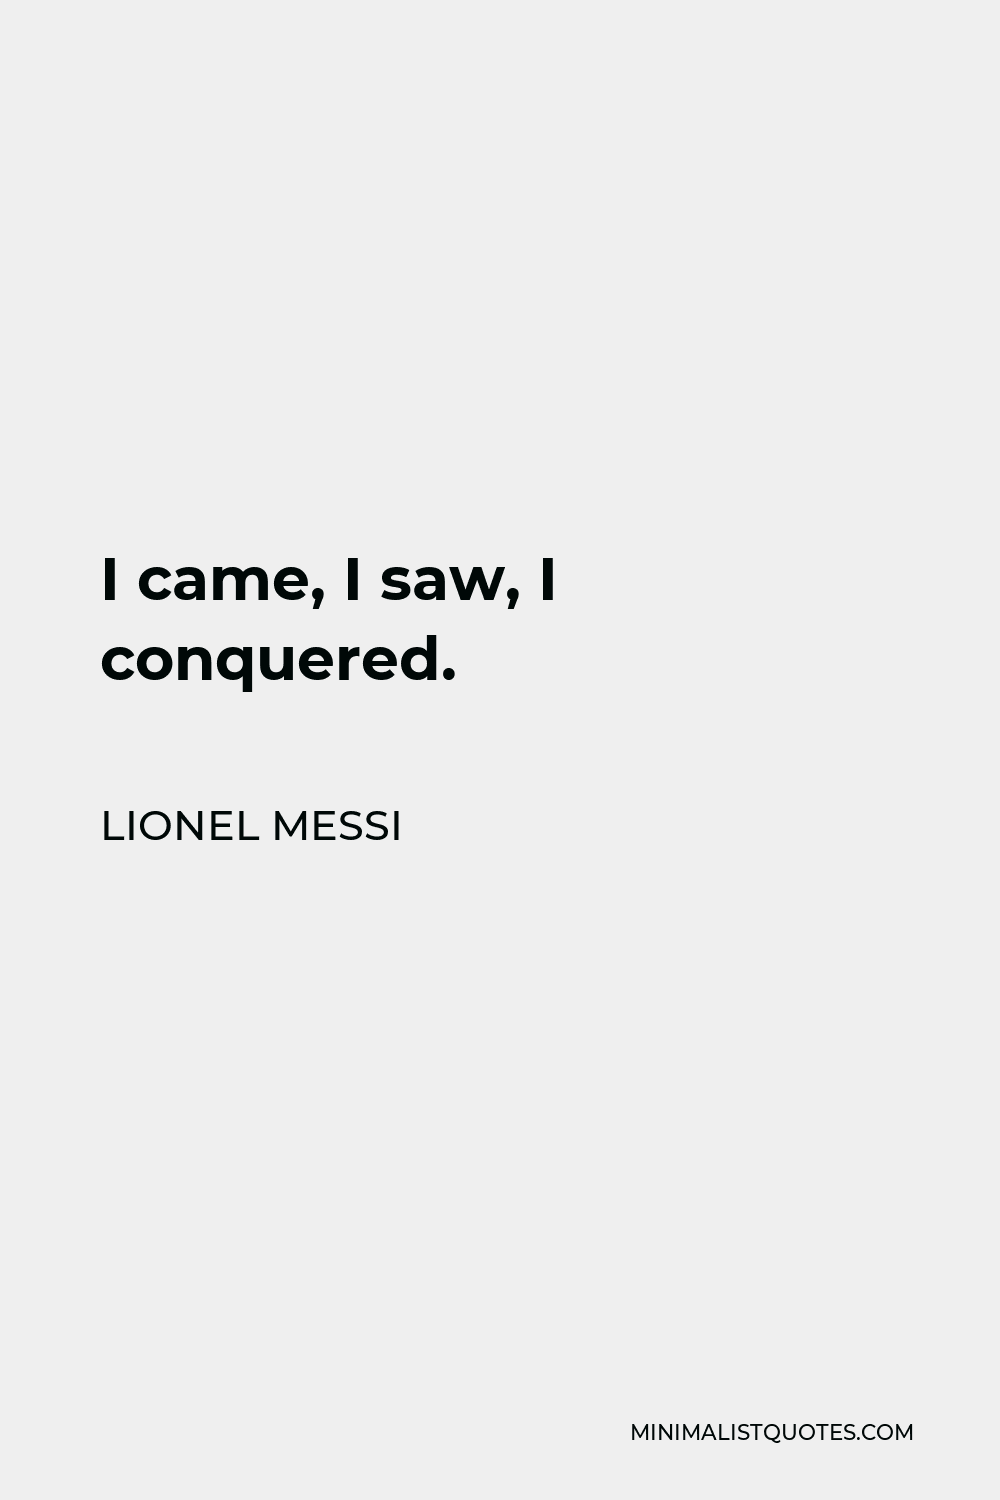 Lionel Messi Quote - I came, I saw, I conquered.